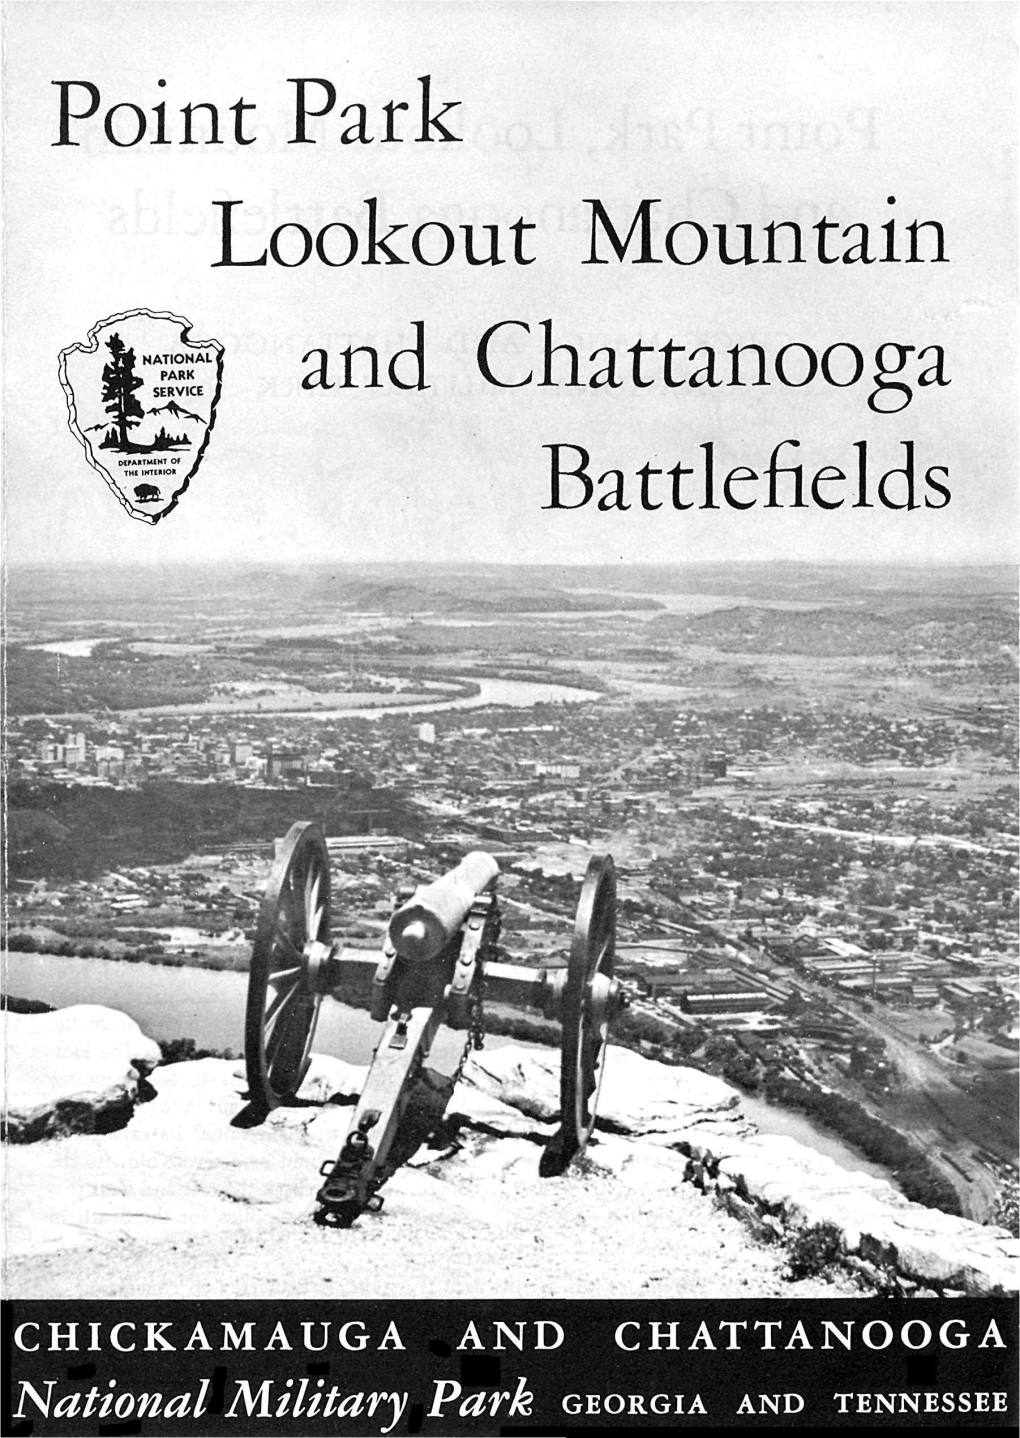 Lookout Mountain and Chattanooga Battlefields Point Park